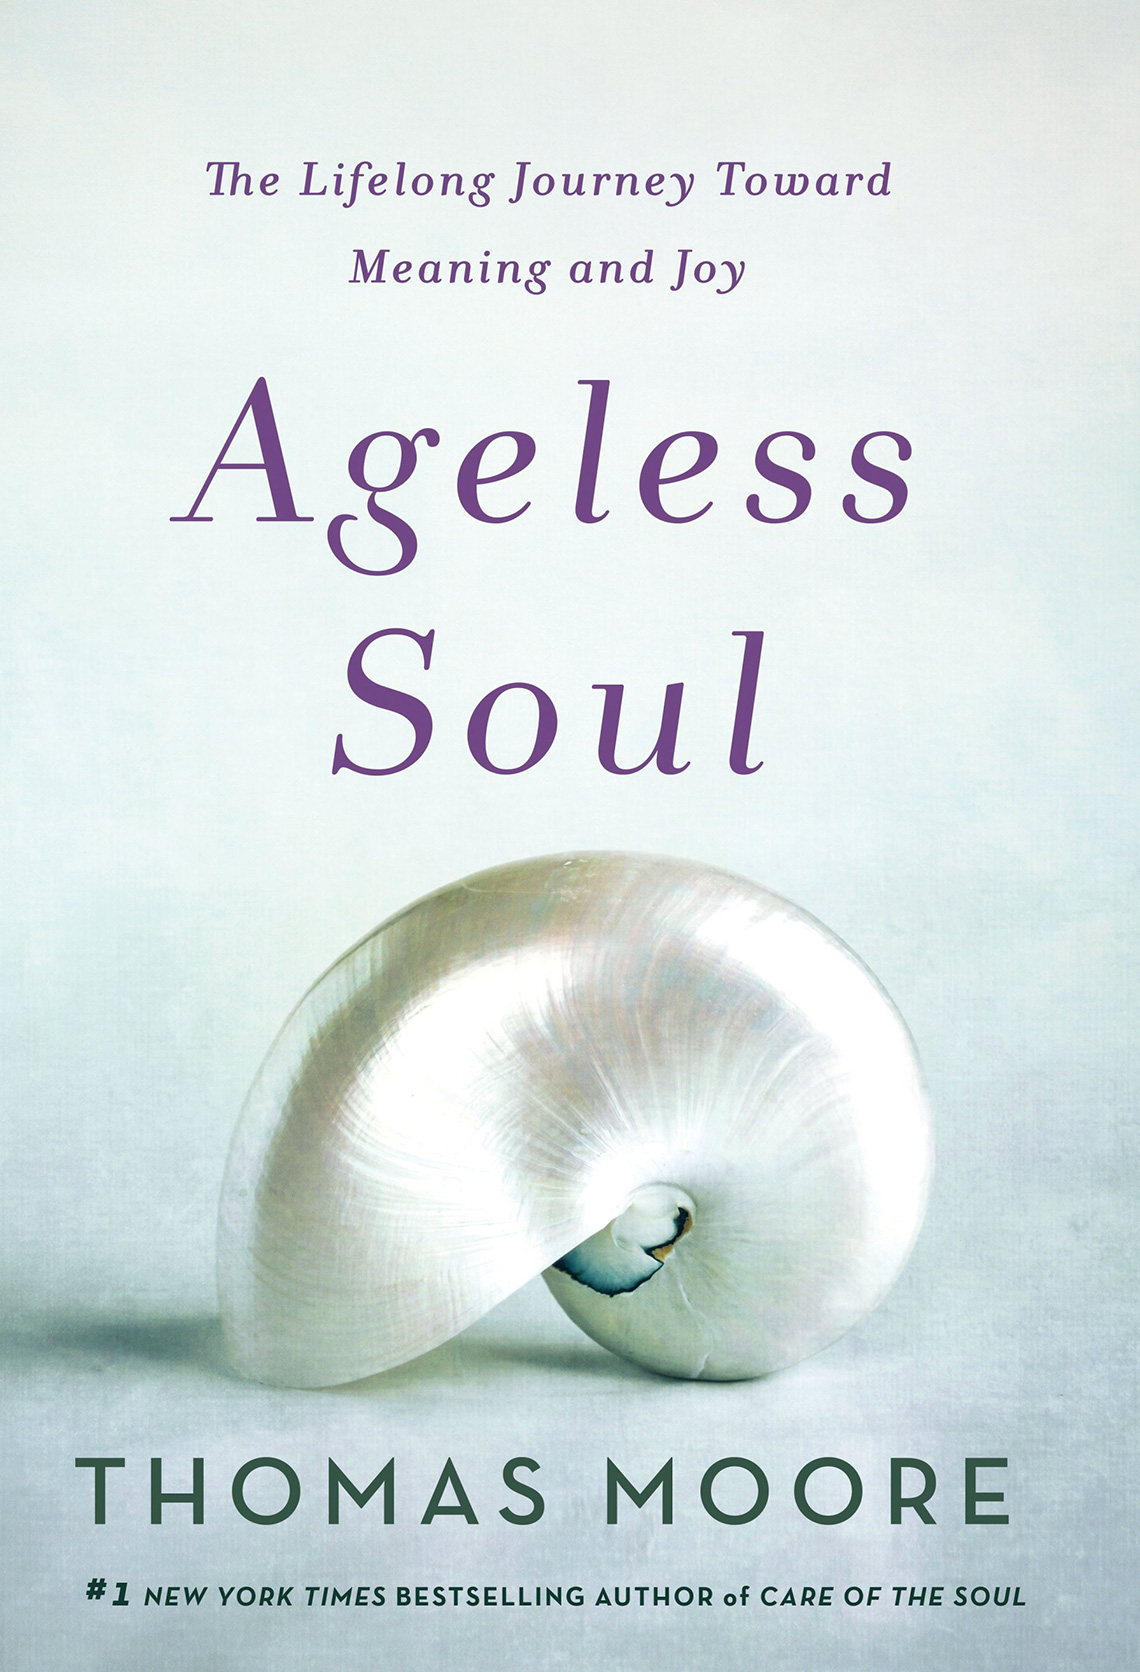 'Ageless Soul: The Lifelong Journey Toward Meaning and Joy' by Thomas Moore